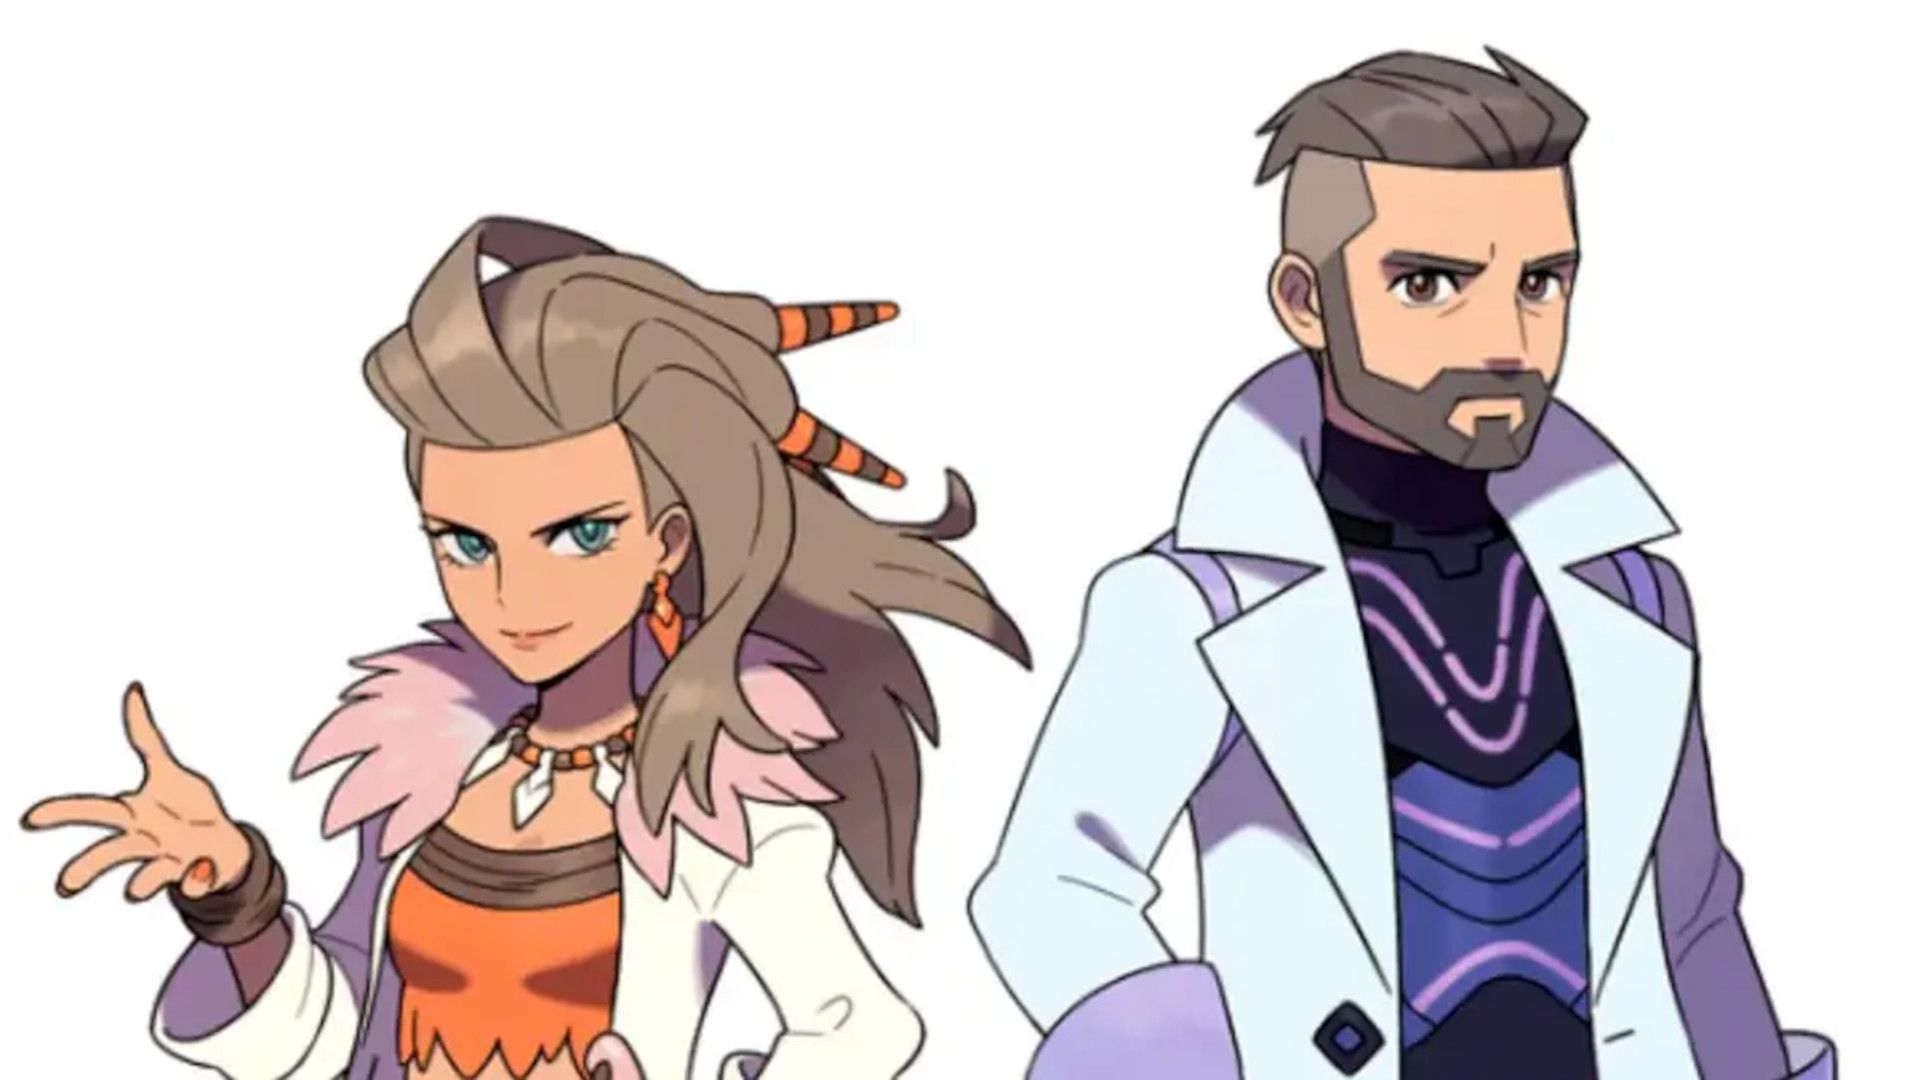 The two professors from 'Pokémon Scarlet and Violet' stand together.